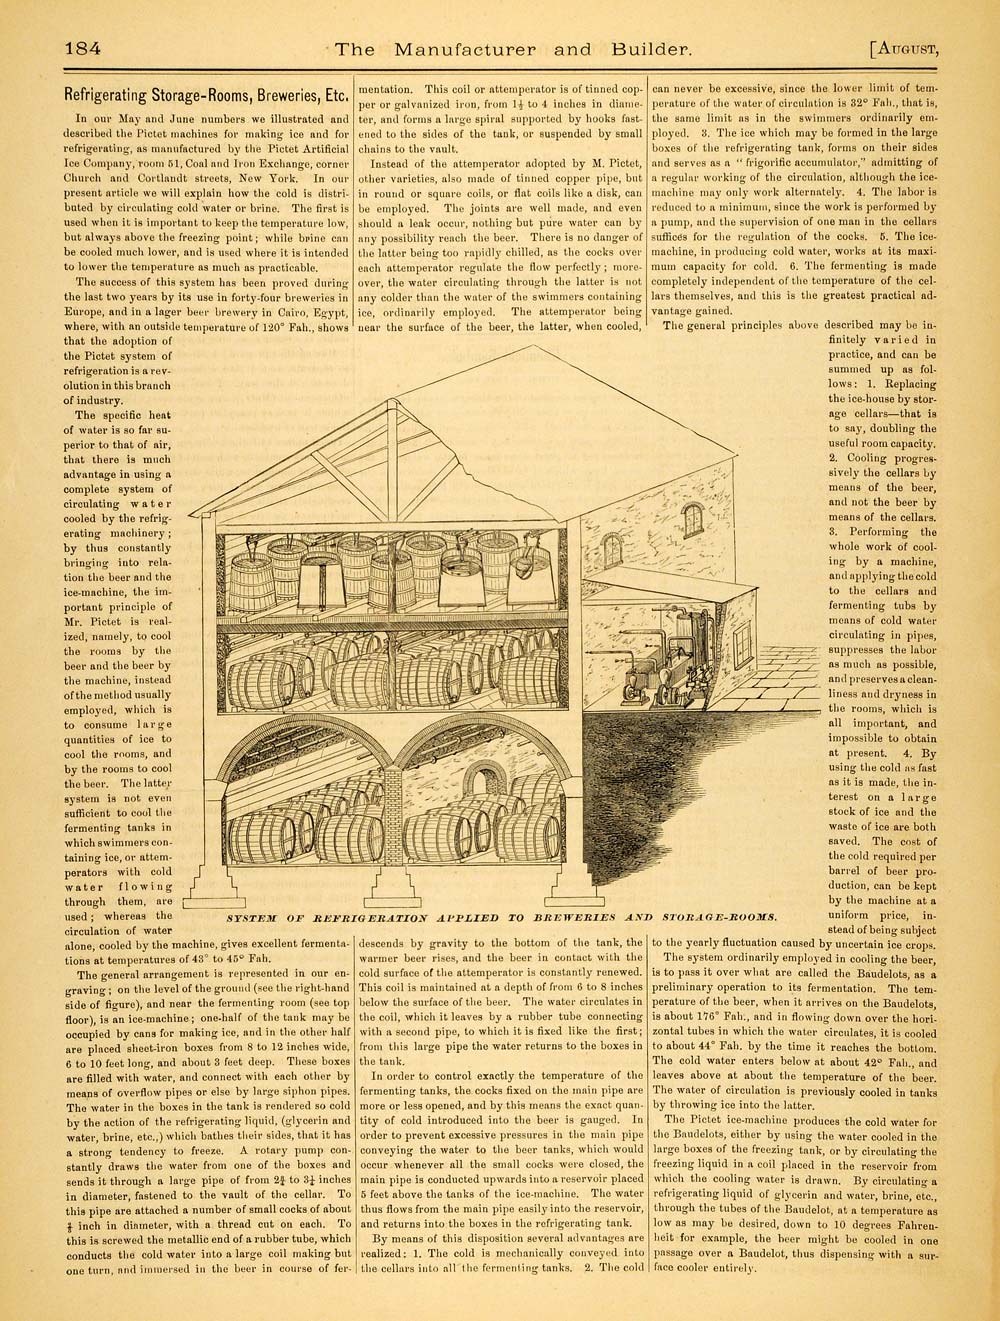 1878 Article Refrigeration System Breweries Storage-Rooms Factory Pictet MAB1